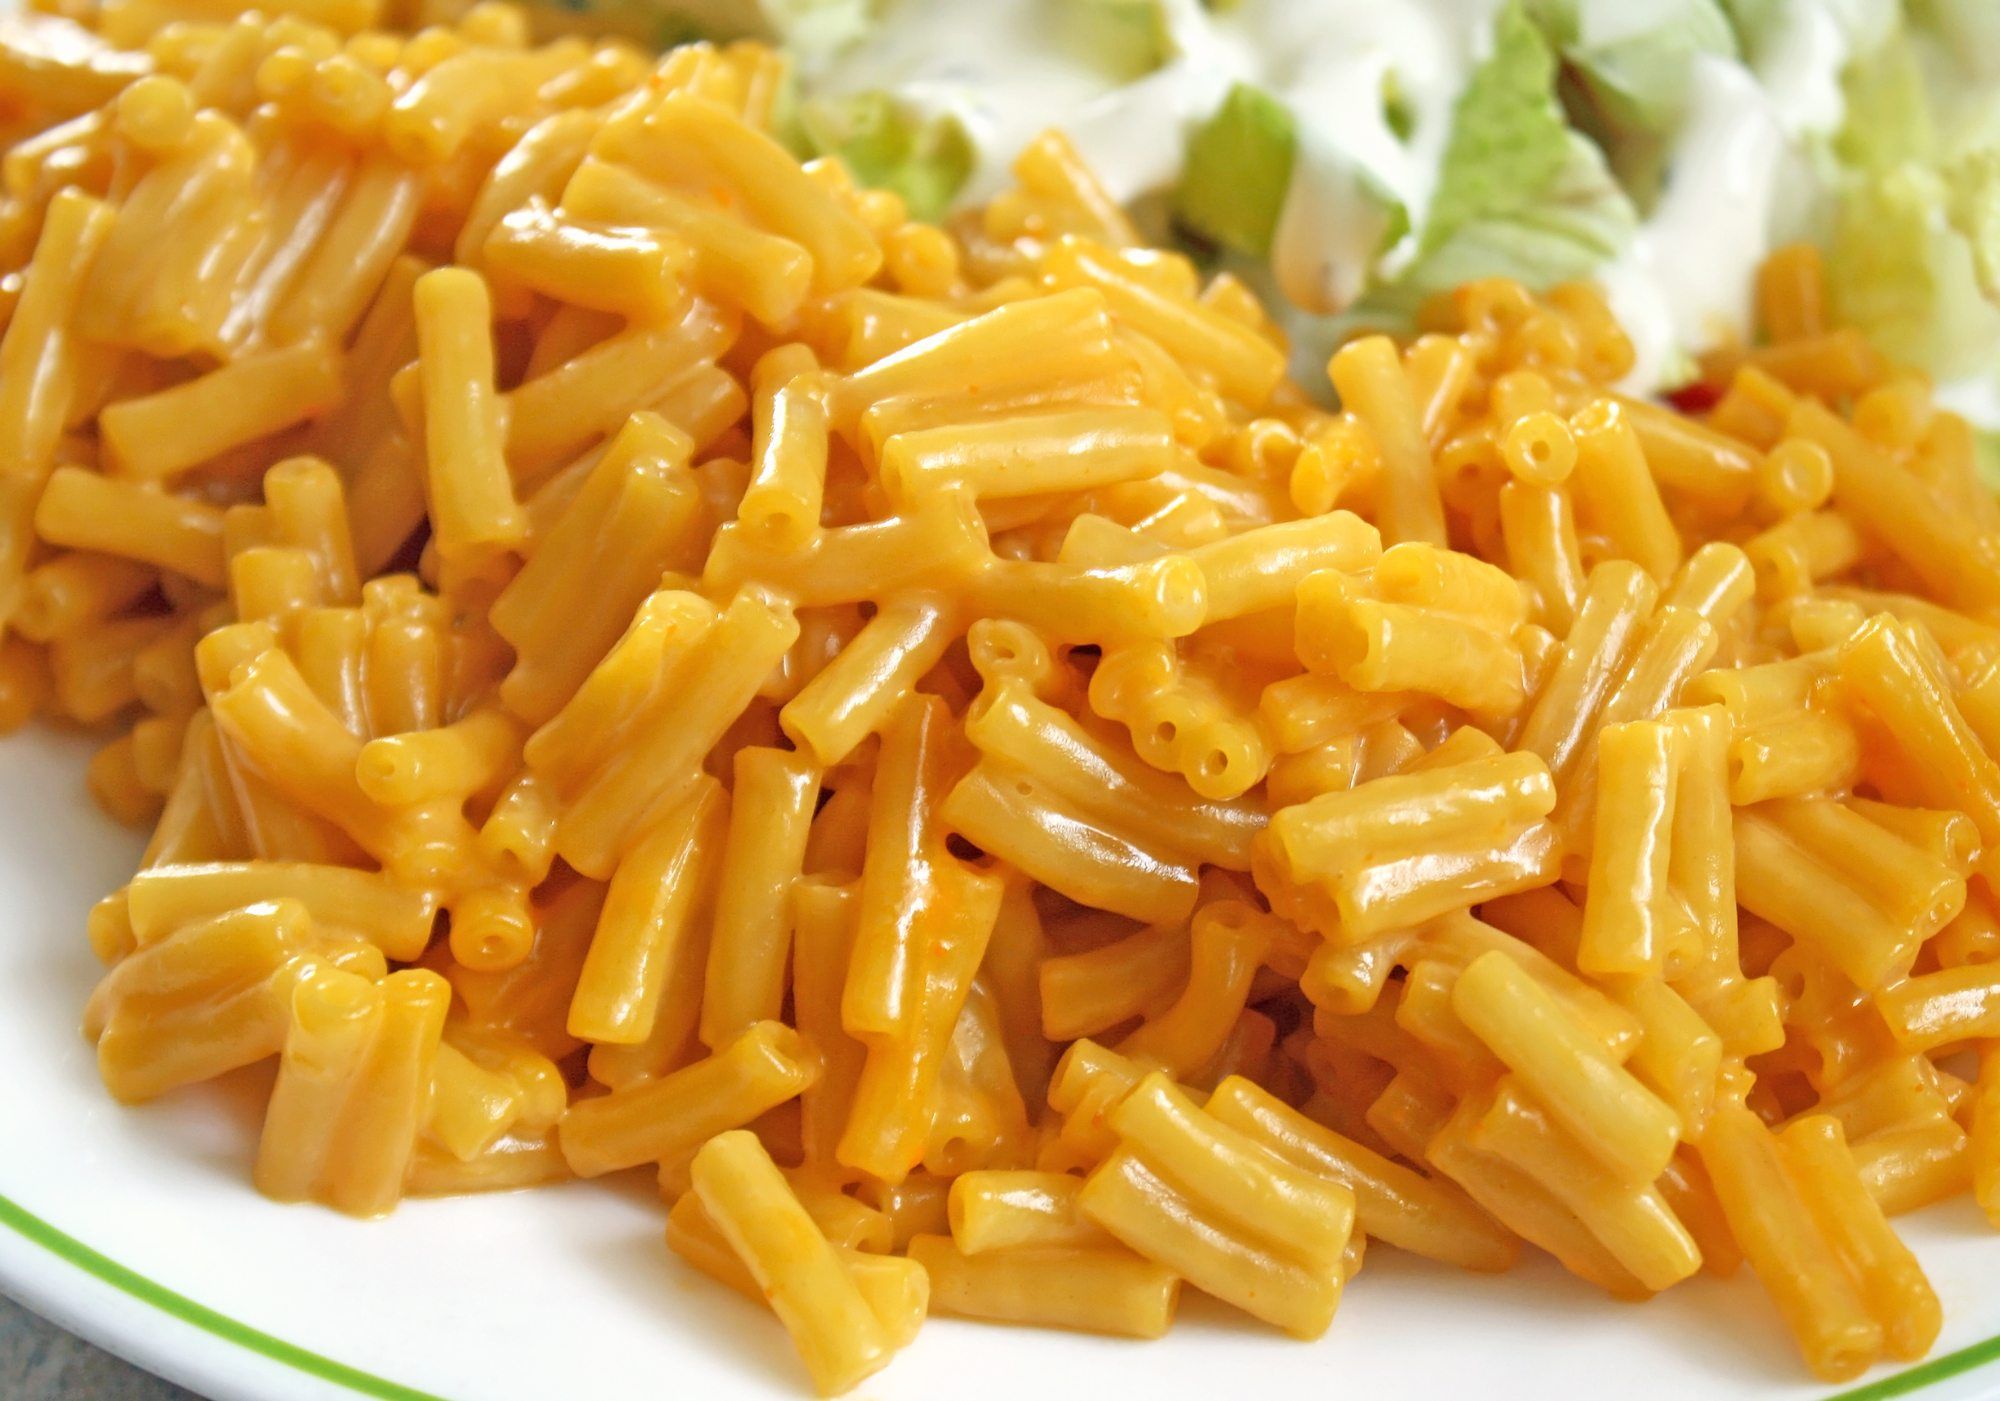 Phthalates detected in Kraft Mac and Cheese, claims class action lawsuit